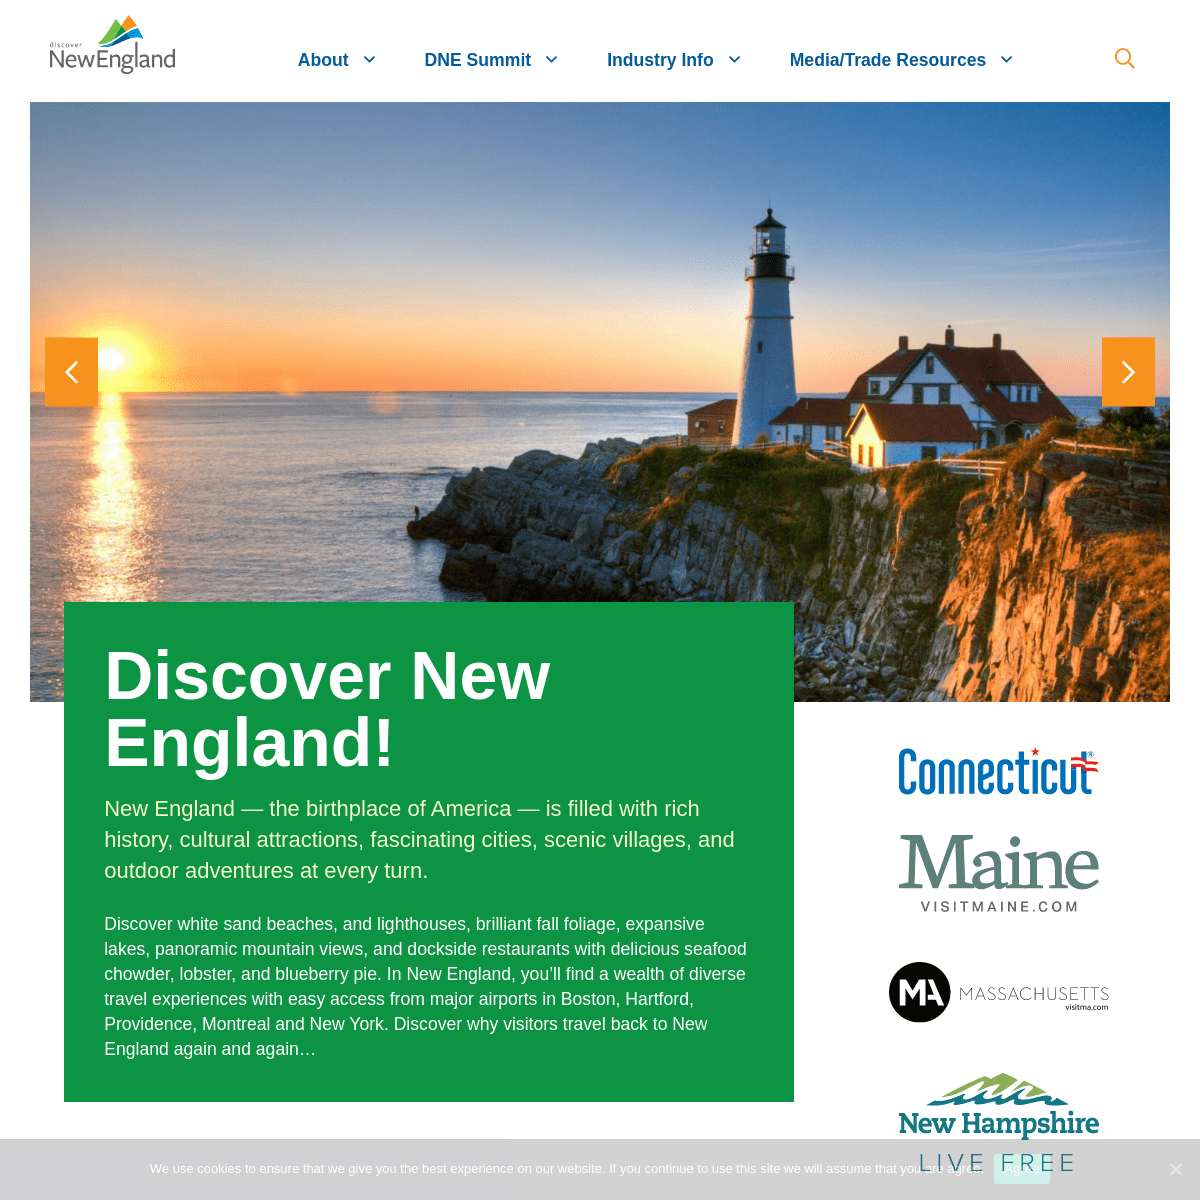 A complete backup of https://discovernewengland.org